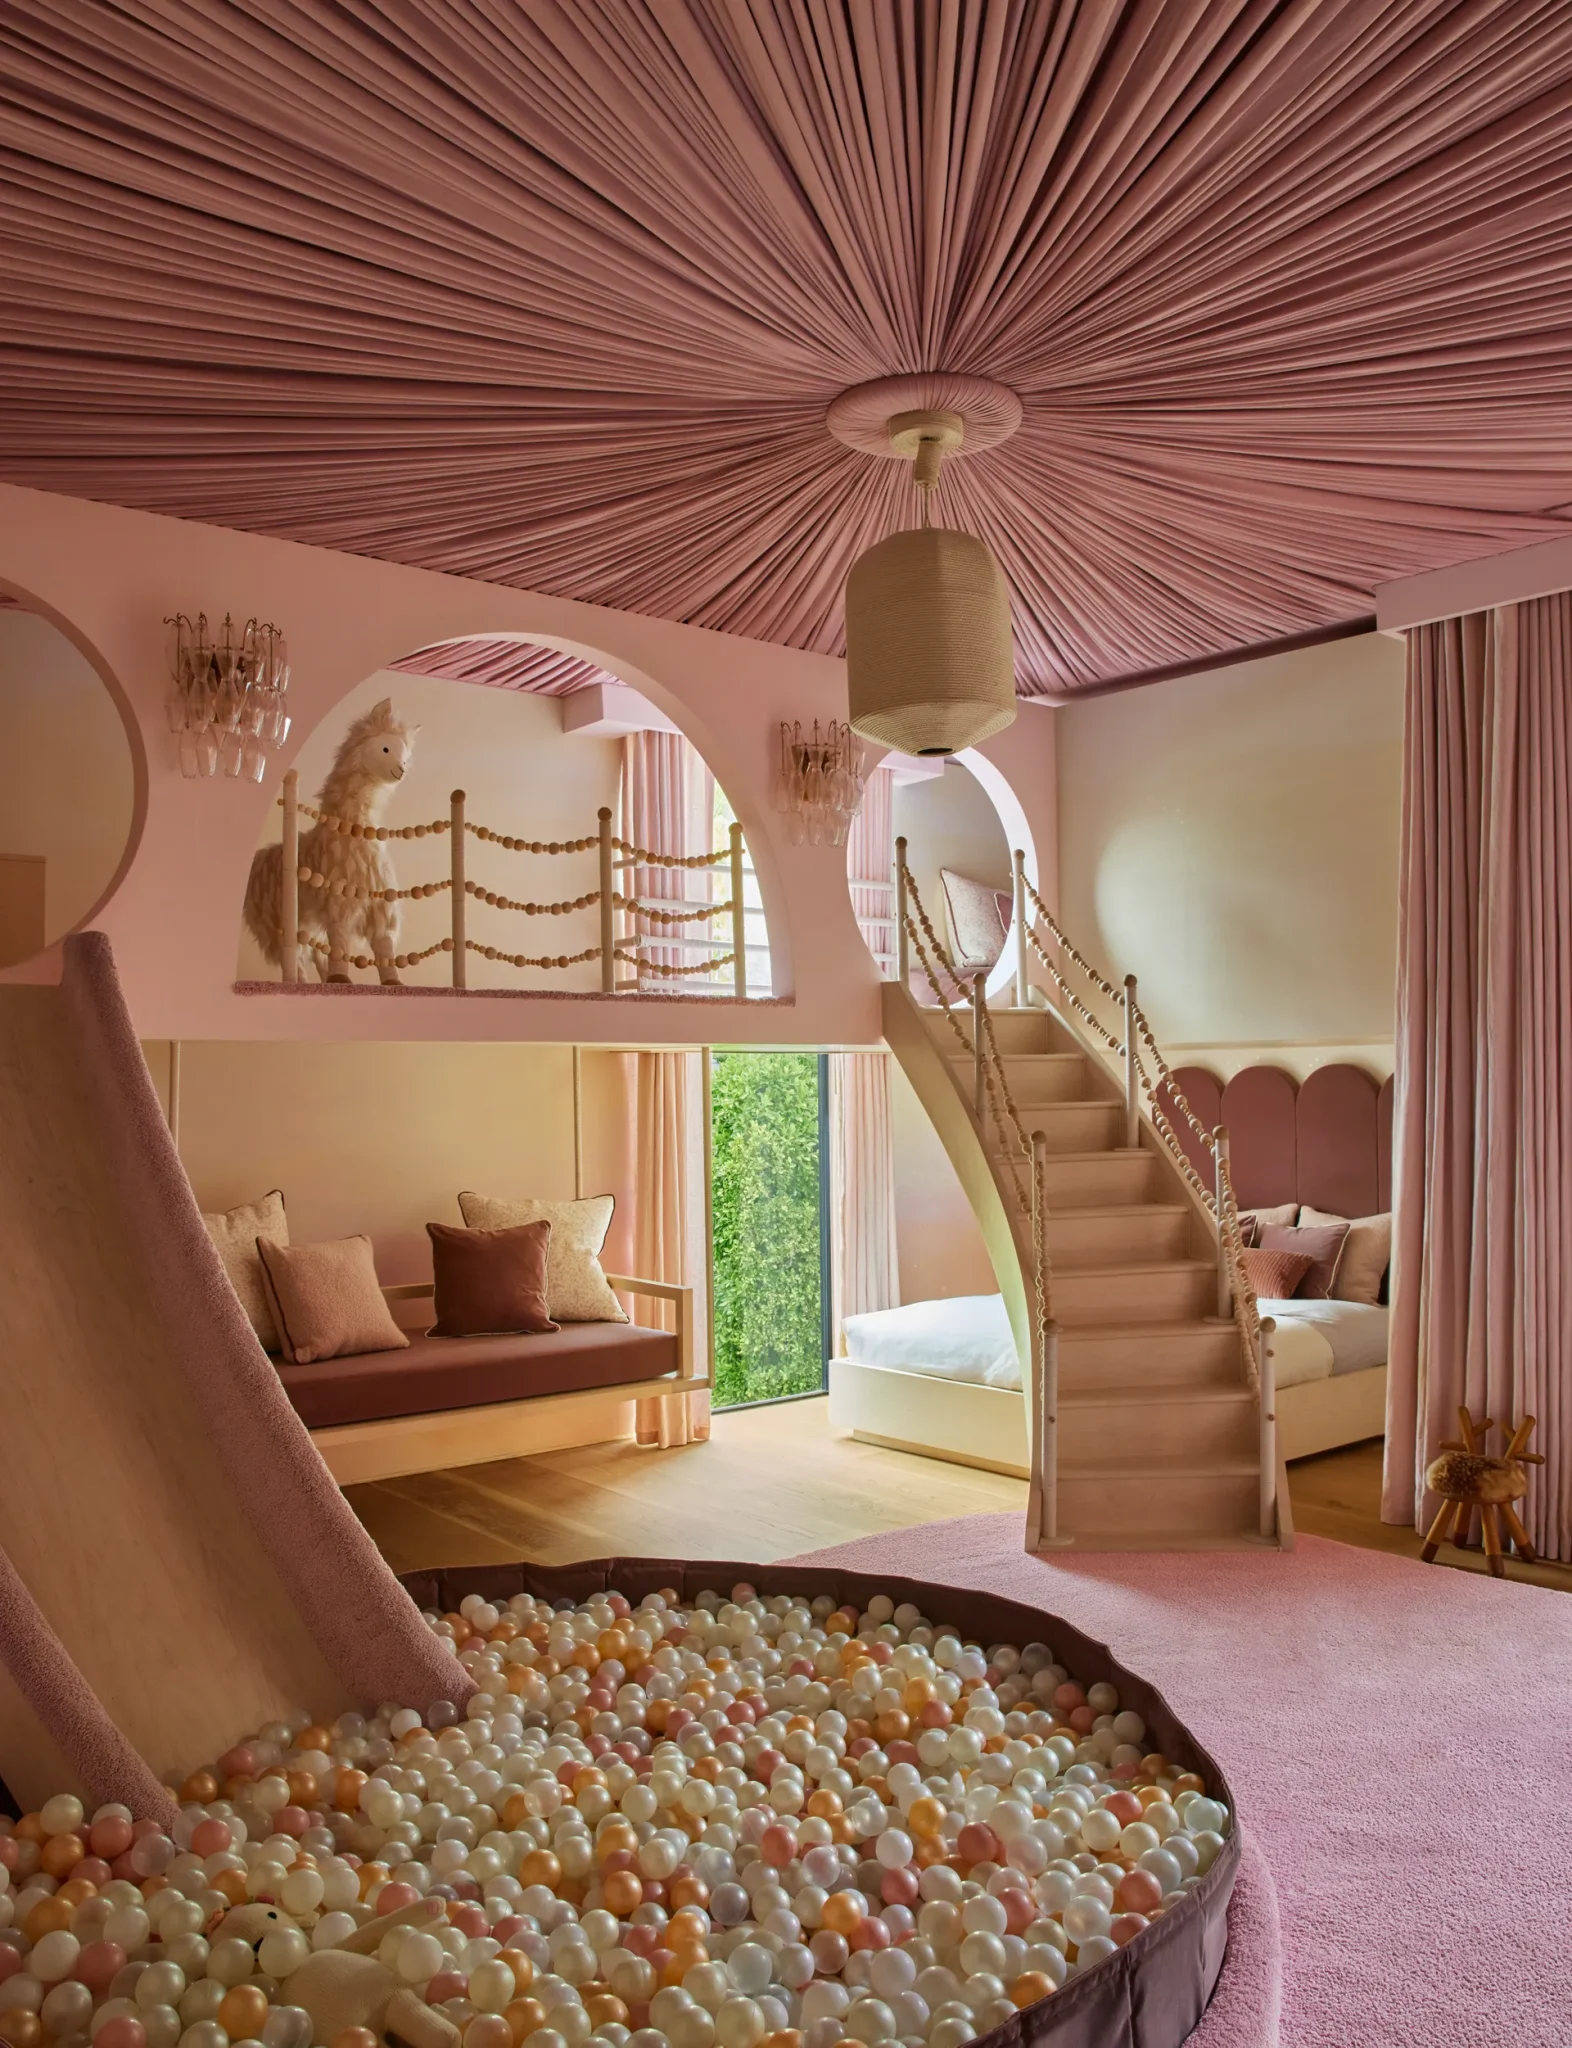 Luna’s fantasy bedroom has a custom bed and slide, and a ceiling tented